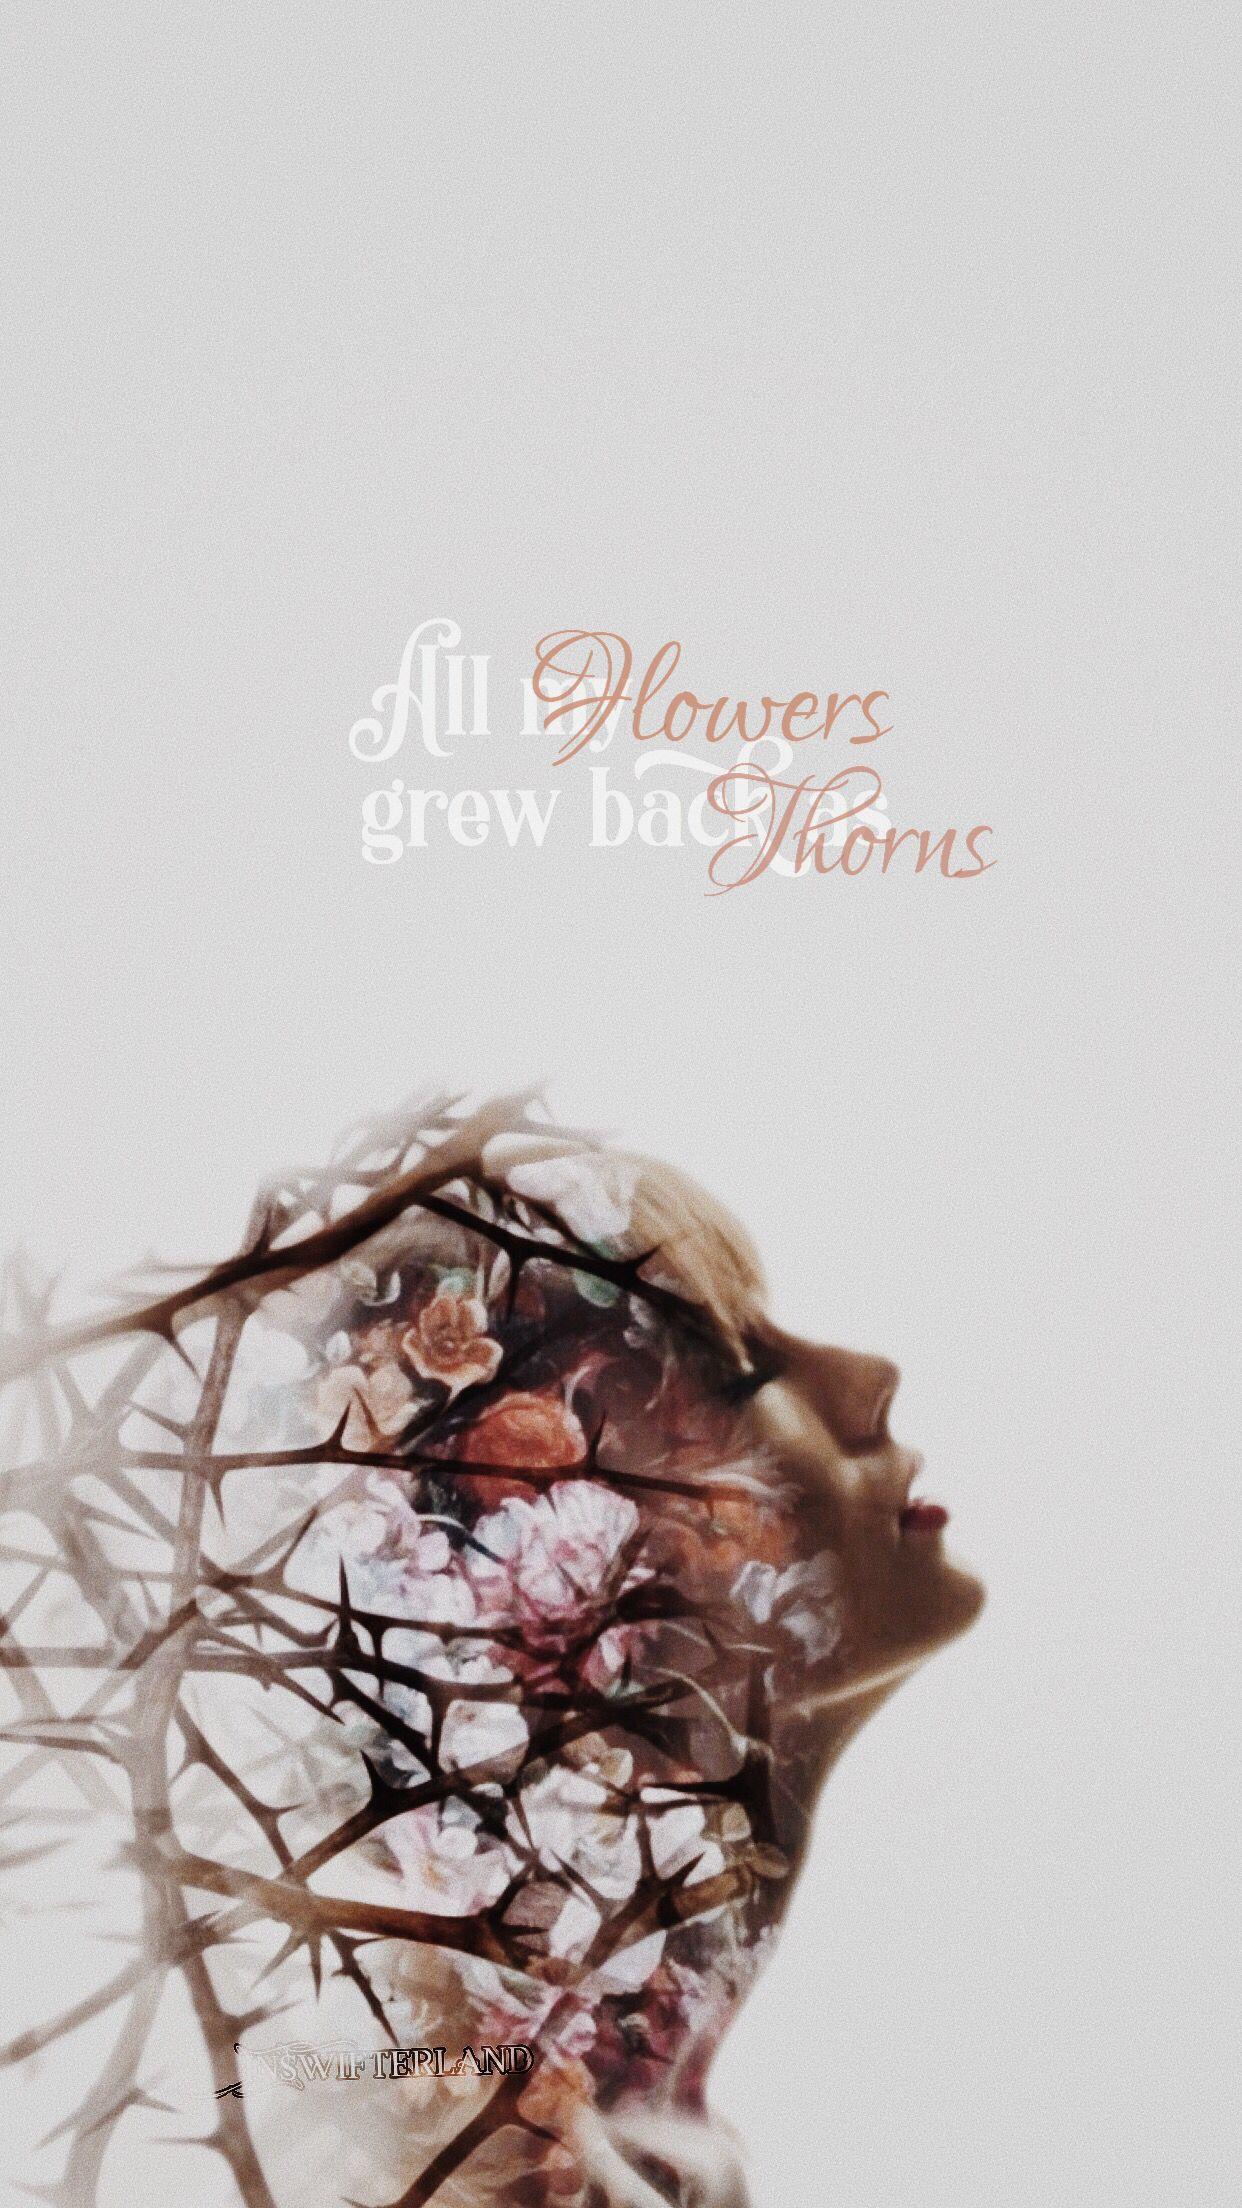 All flowers grew back thorns. - Taylor Swift